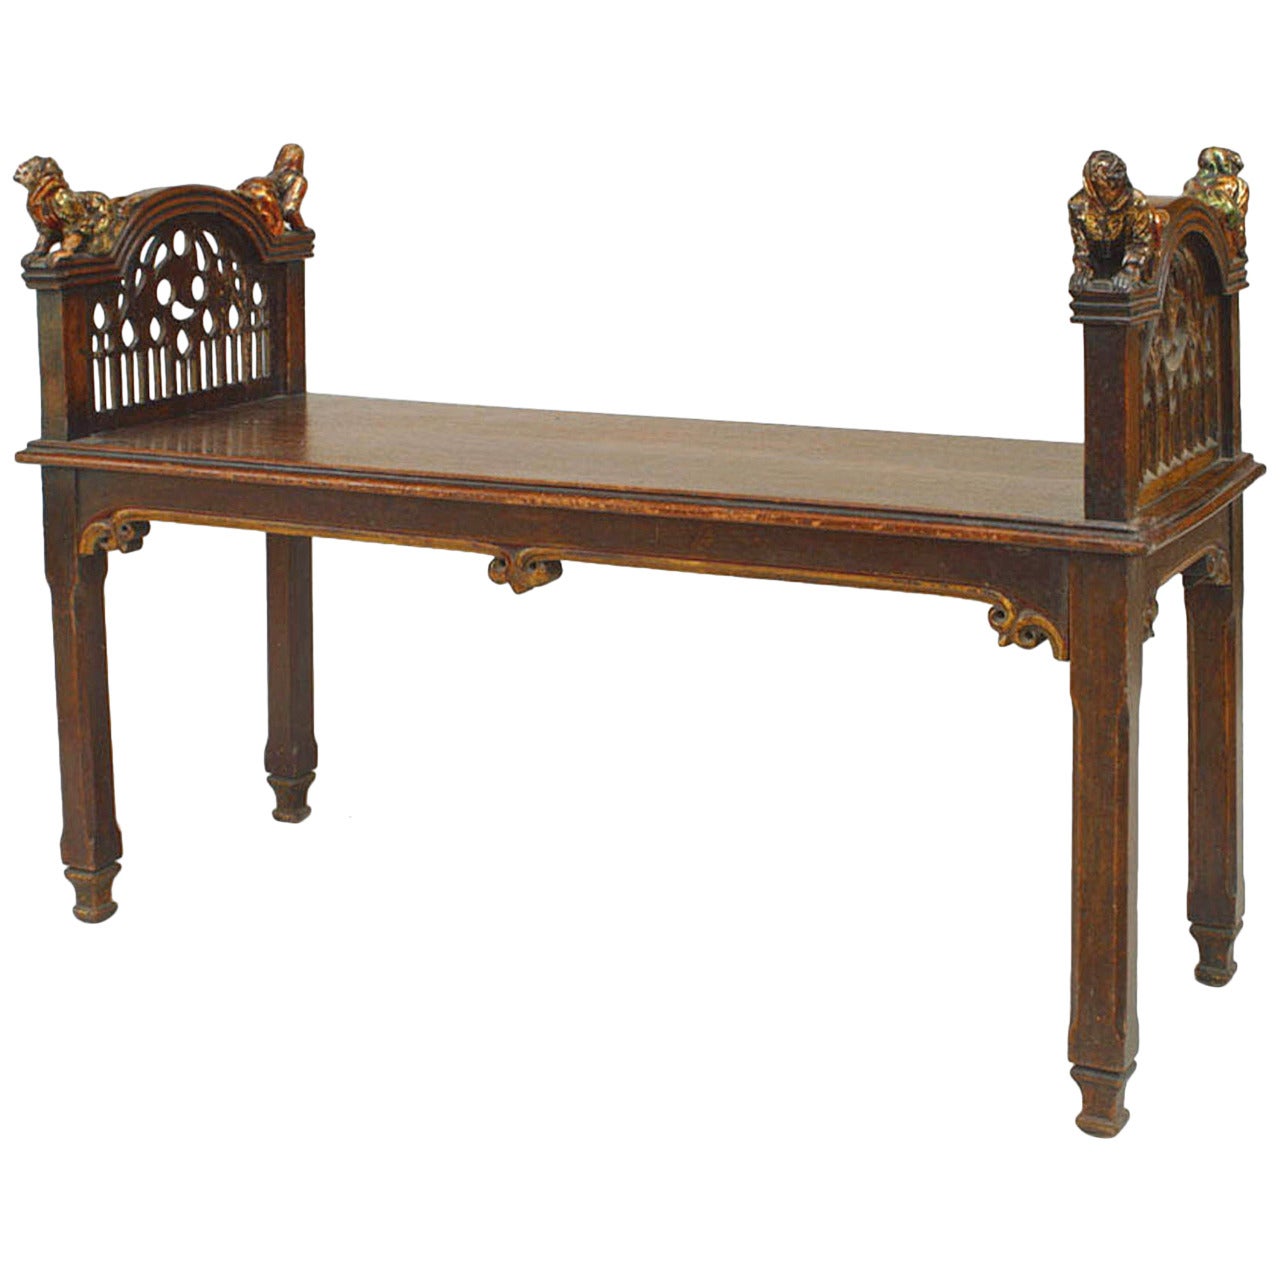 19th c. English Gothic Revival Bench